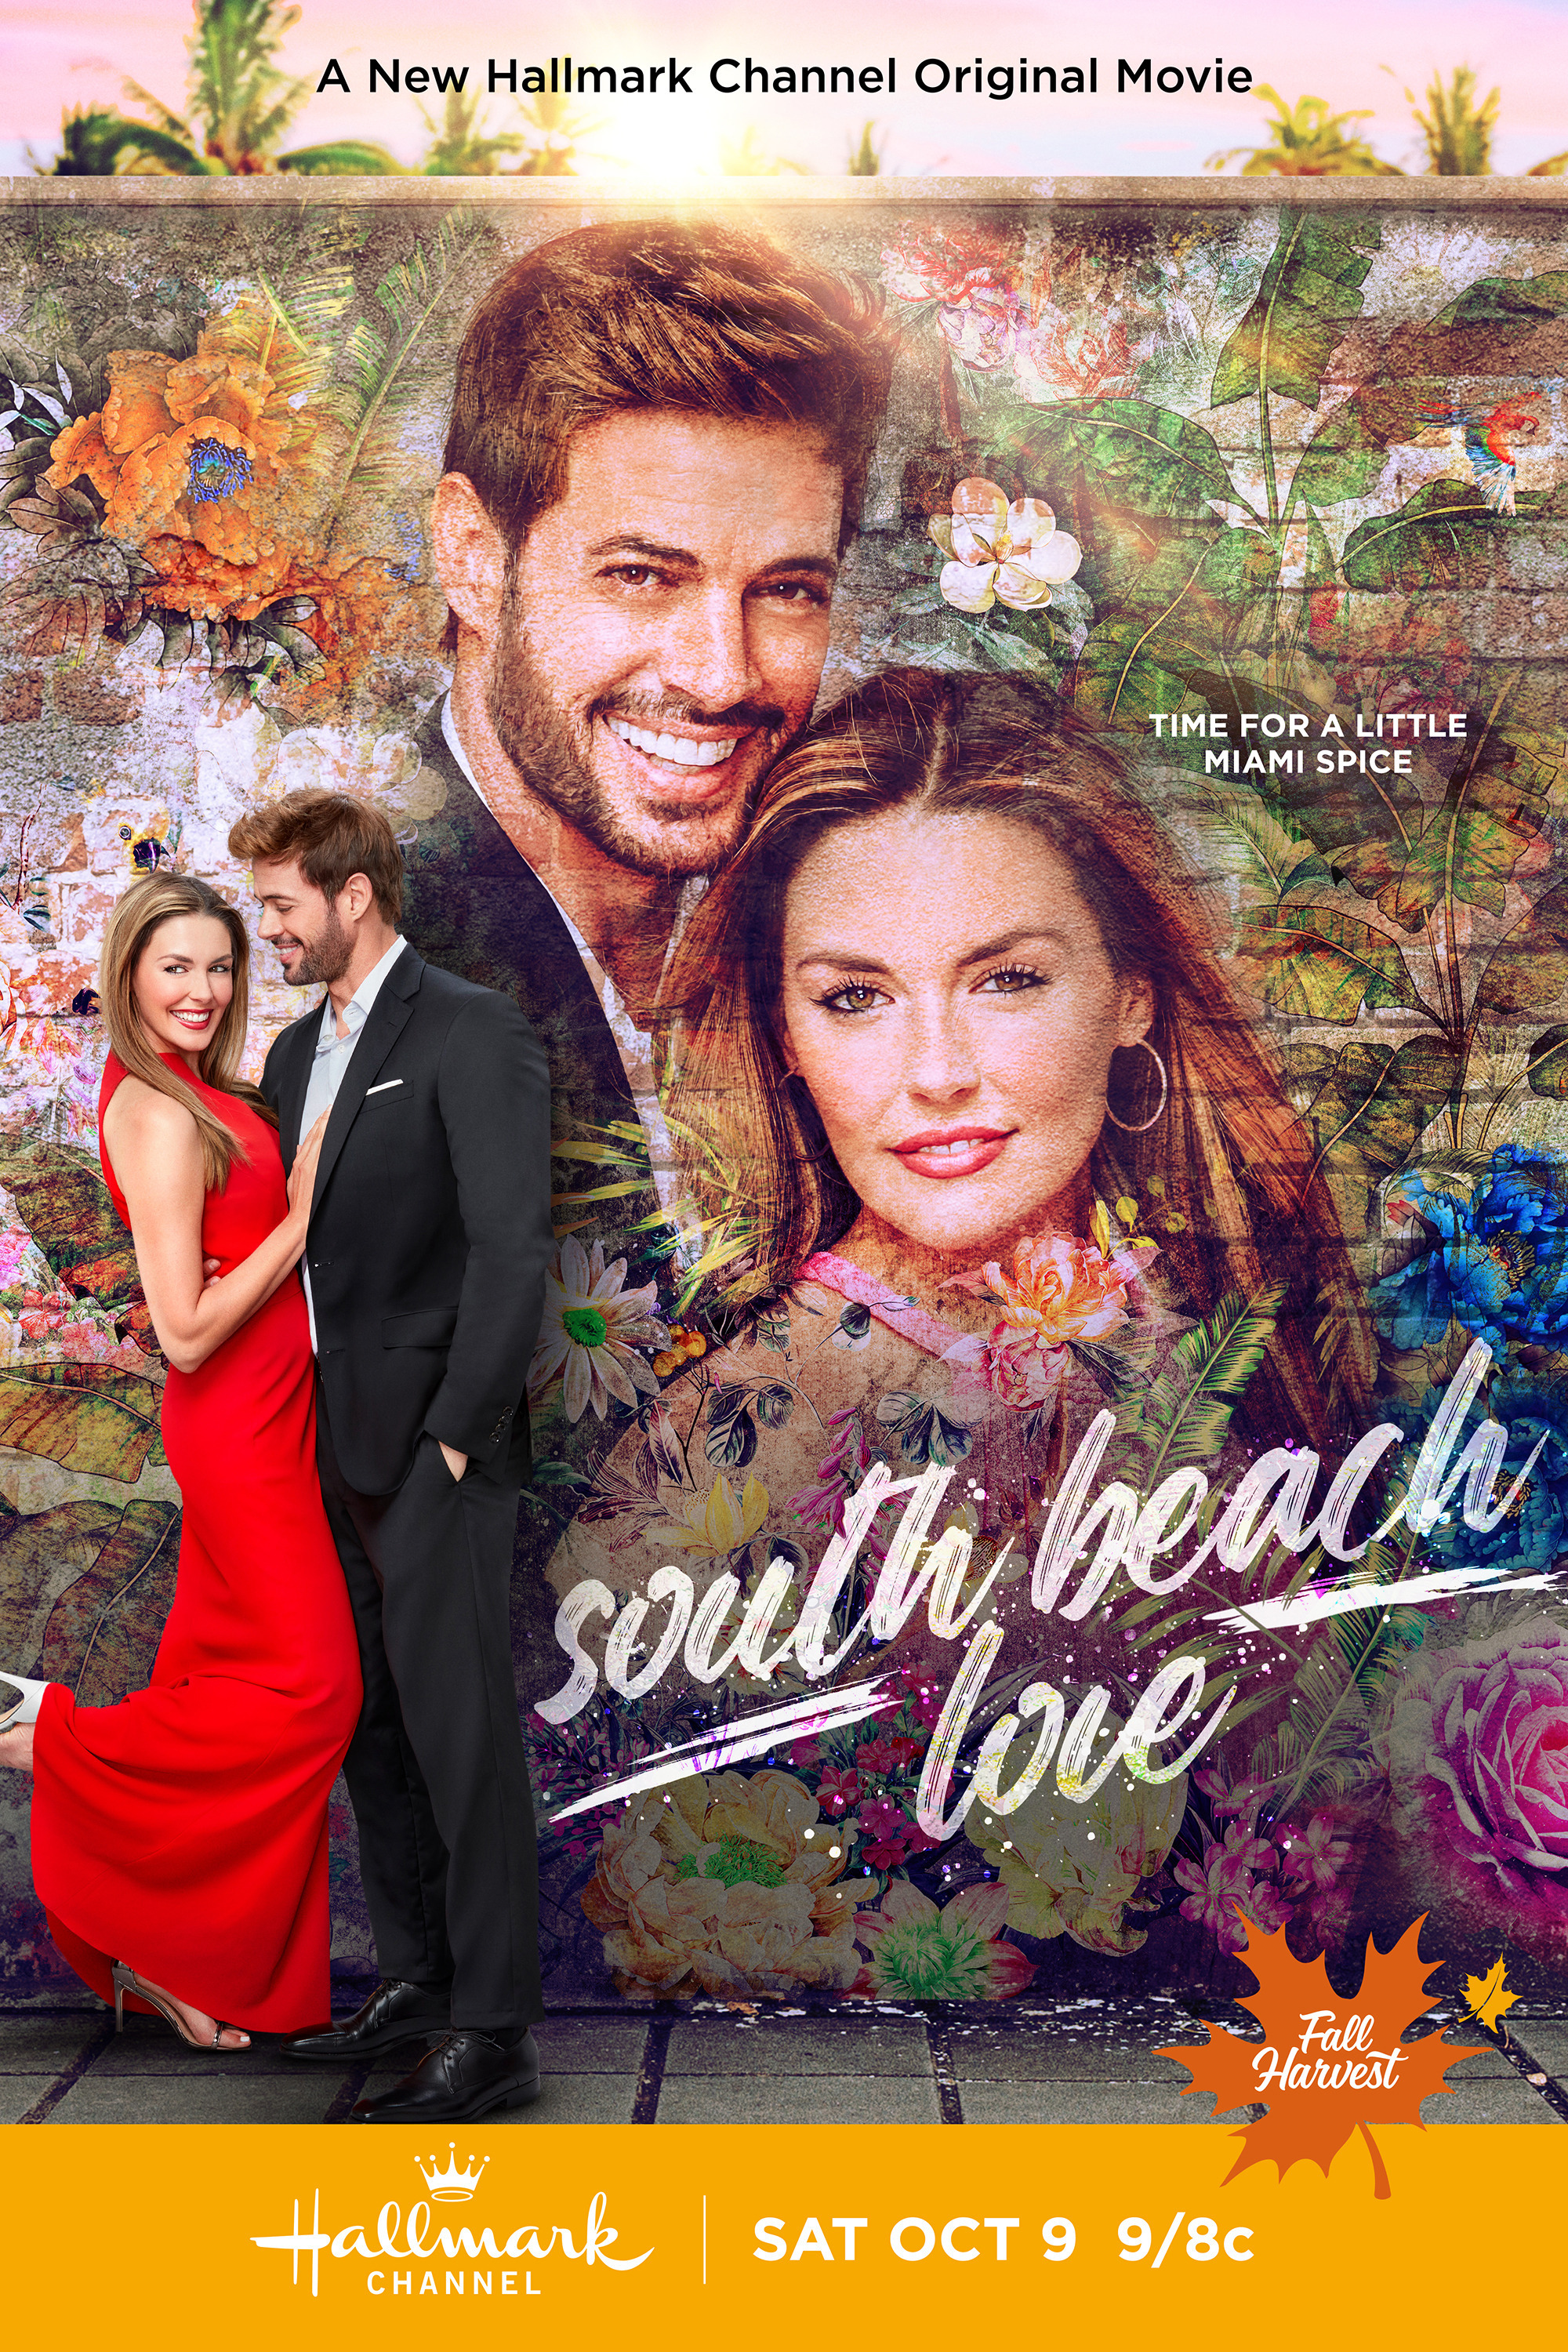 Mega Sized TV Poster Image for South Beach Love 